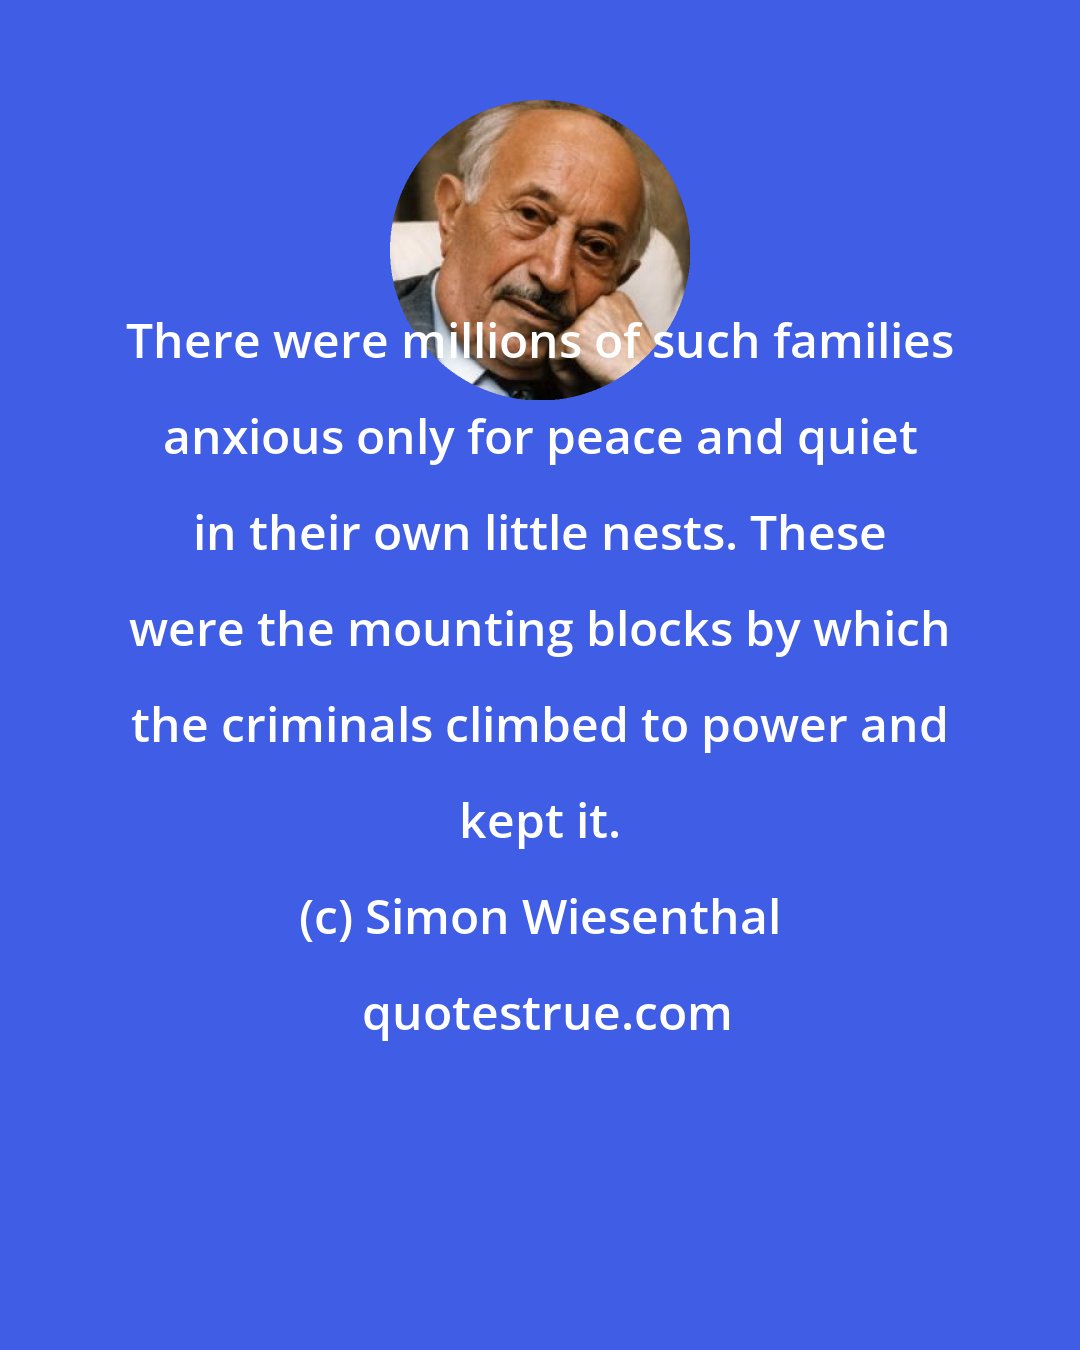 Simon Wiesenthal: There were millions of such families anxious only for peace and quiet in their own little nests. These were the mounting blocks by which the criminals climbed to power and kept it.